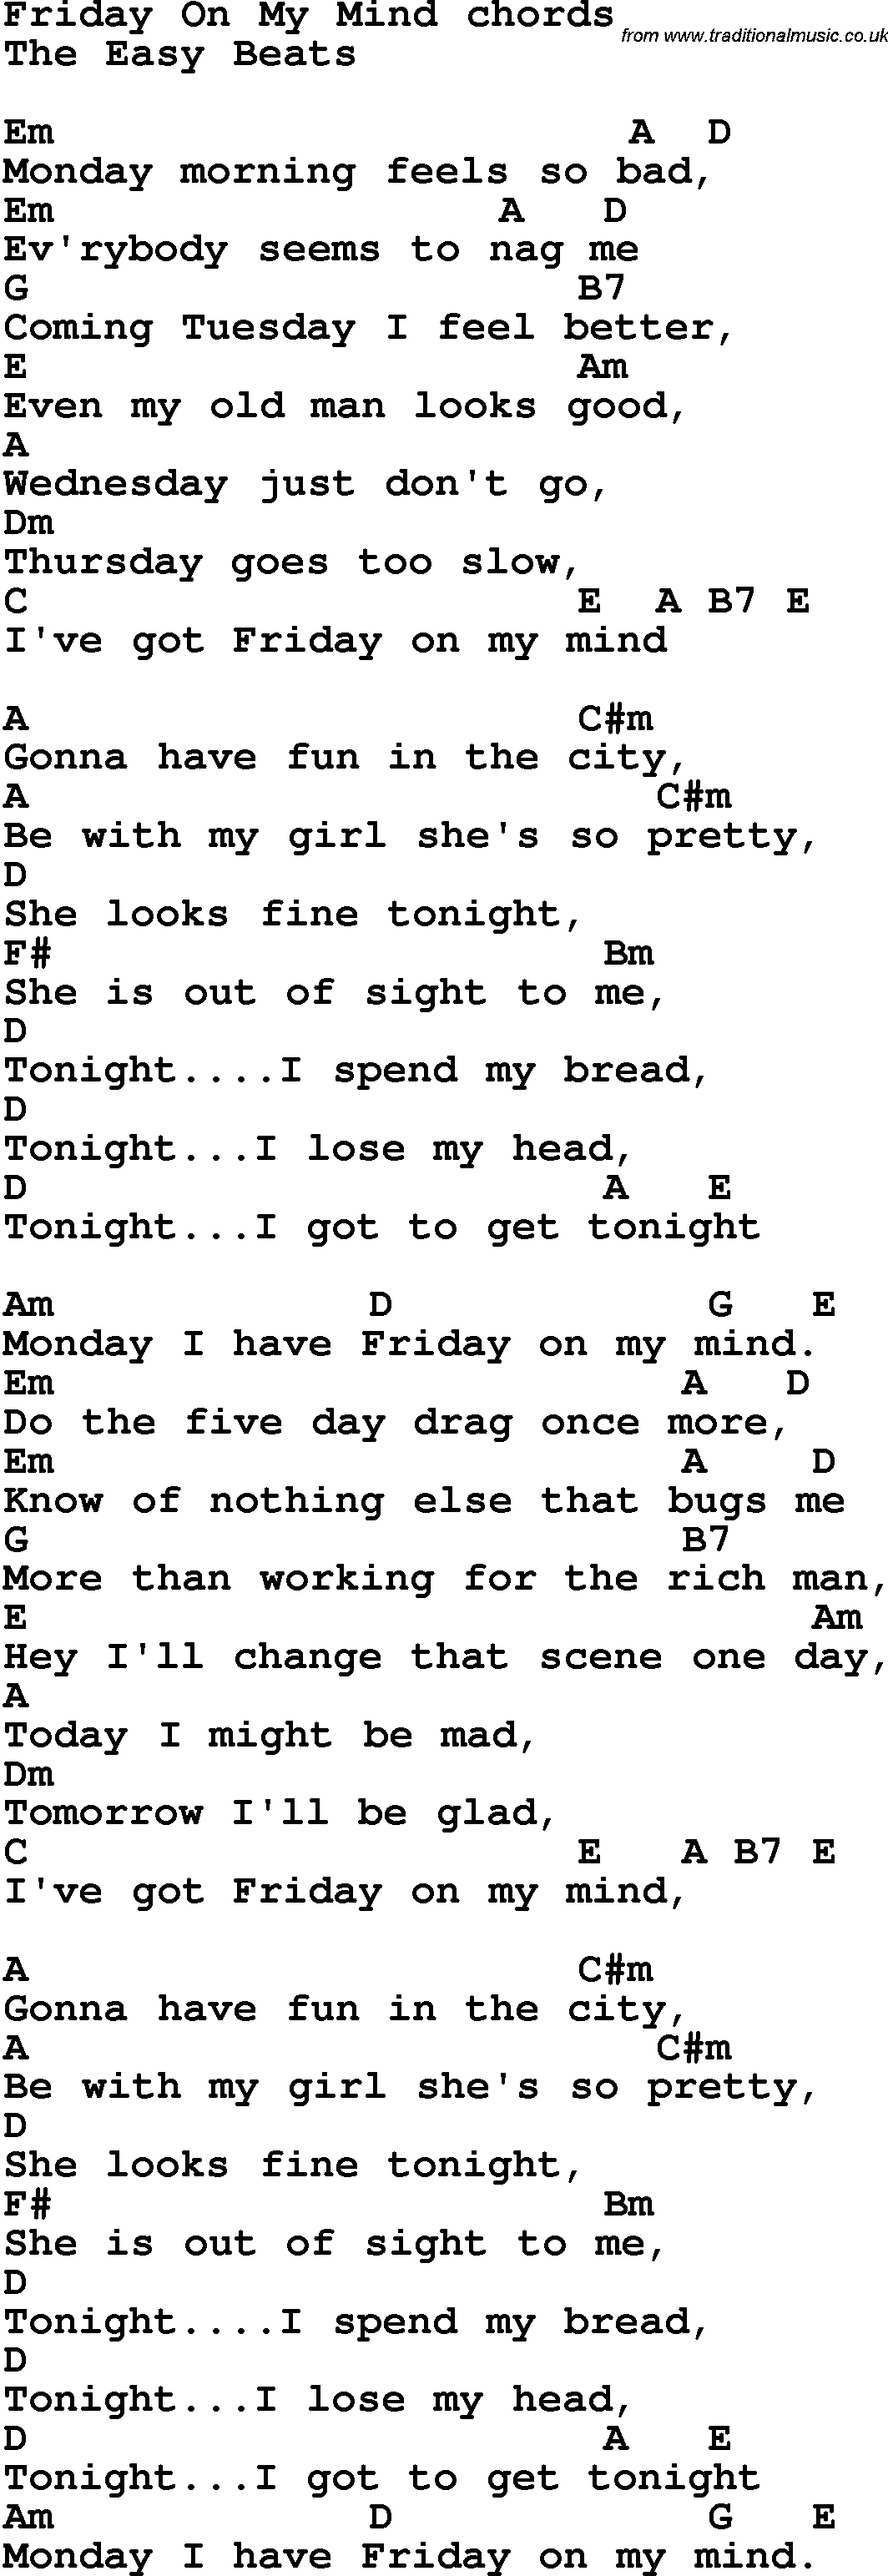 Song Lyrics with guitar chords for Friday On My Mind